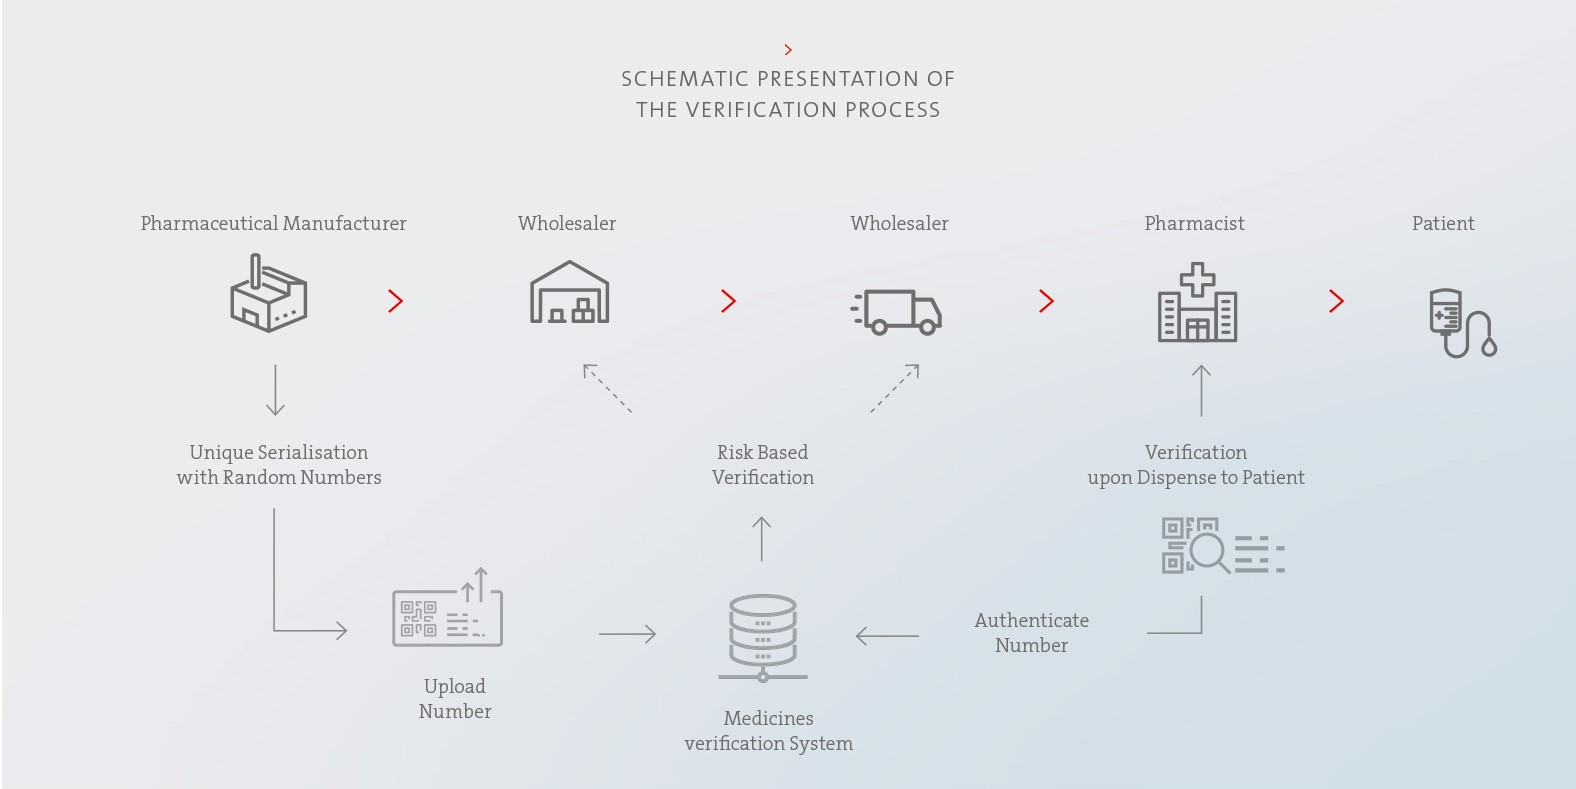 Schematic presentation of the verification process in the EU